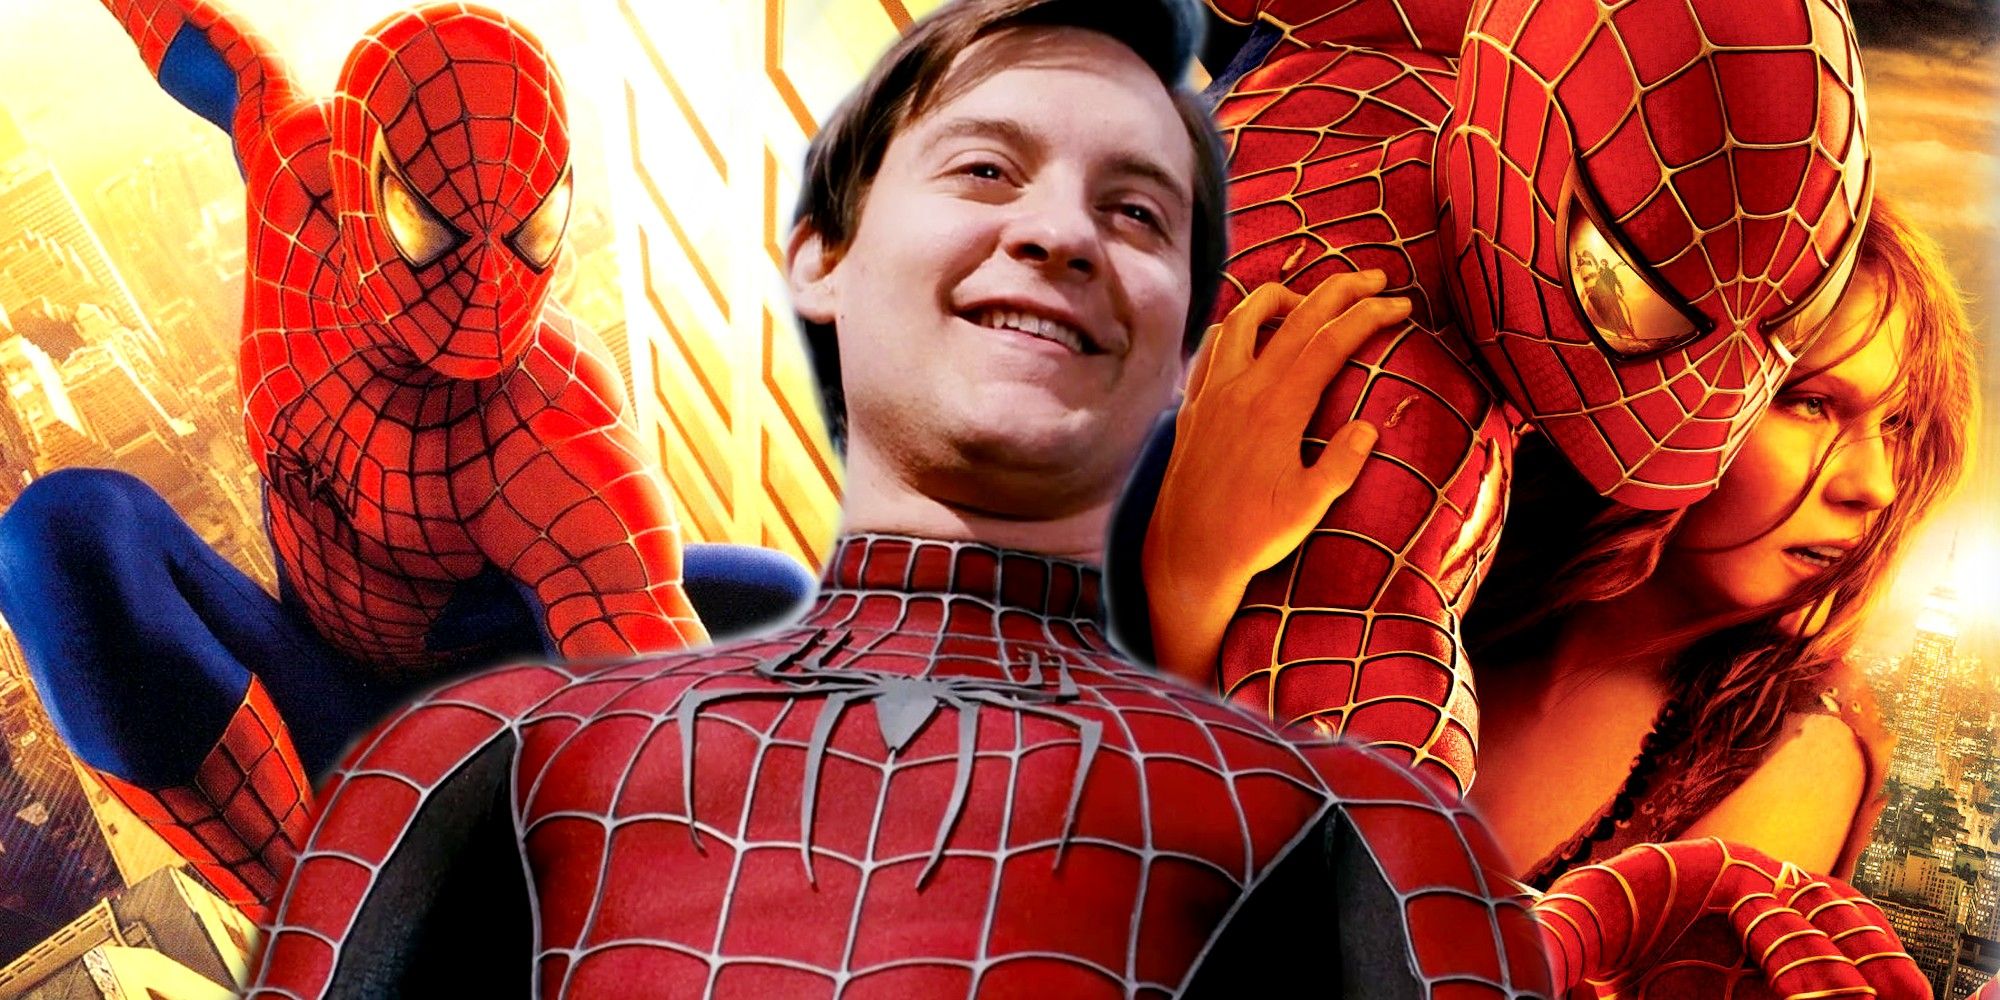 Maguire smiling as Spider-Man with posters for the first two films